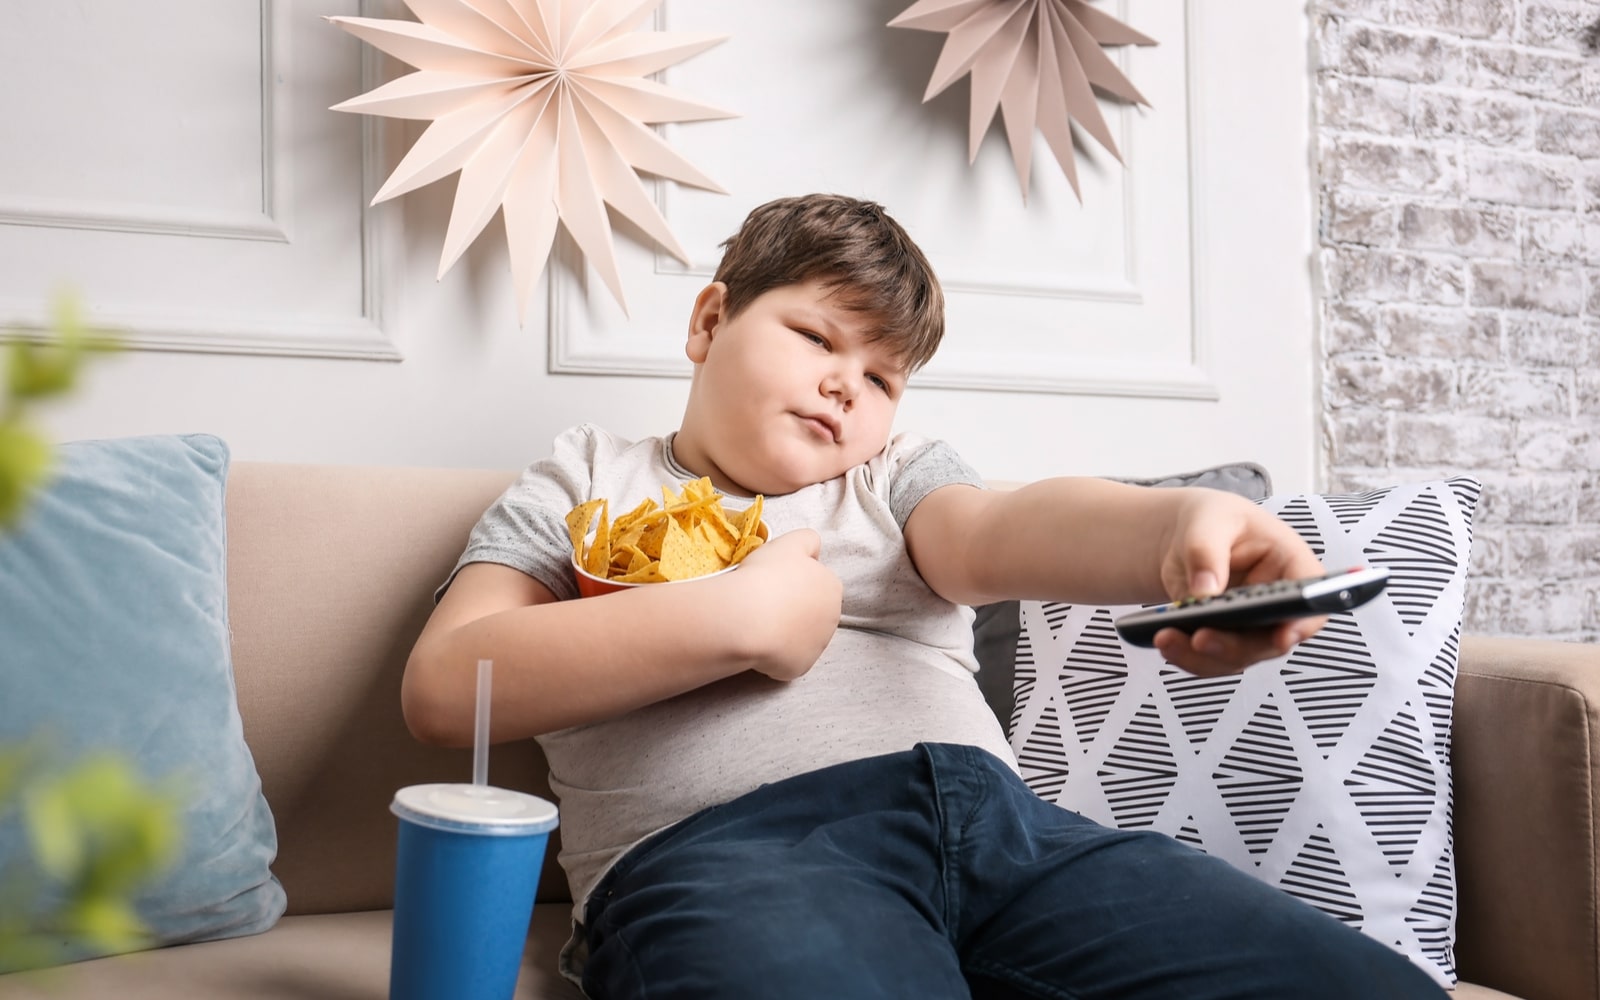 Overweight Child Eating